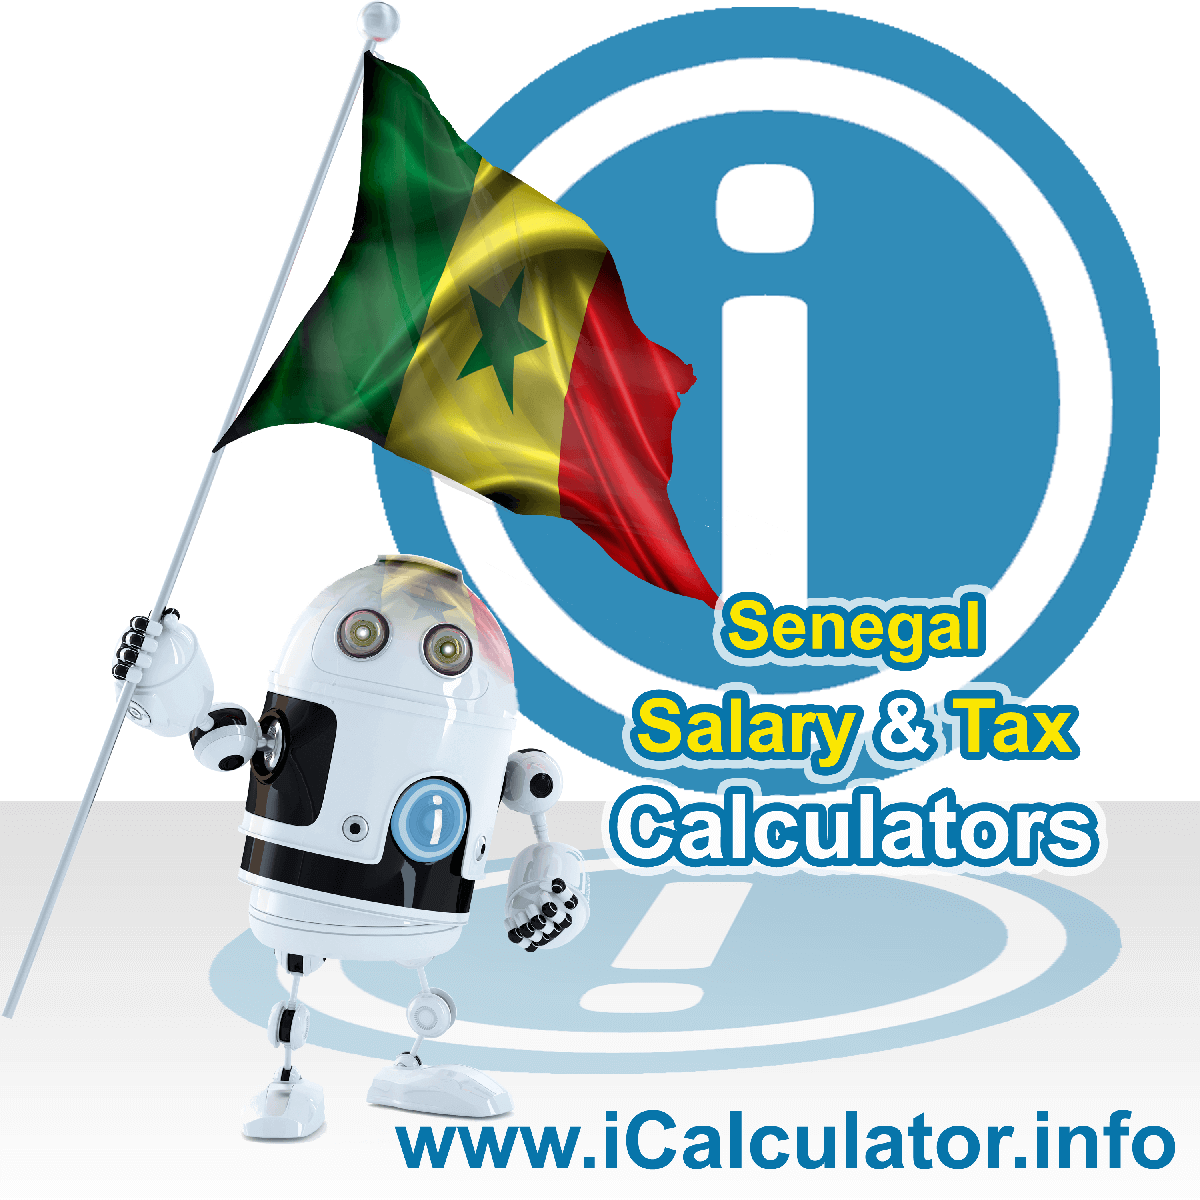 Senegal Salary Calculator. This image shows the Senegalese flag and information relating to the tax formula for the Senegal Tax Calculator